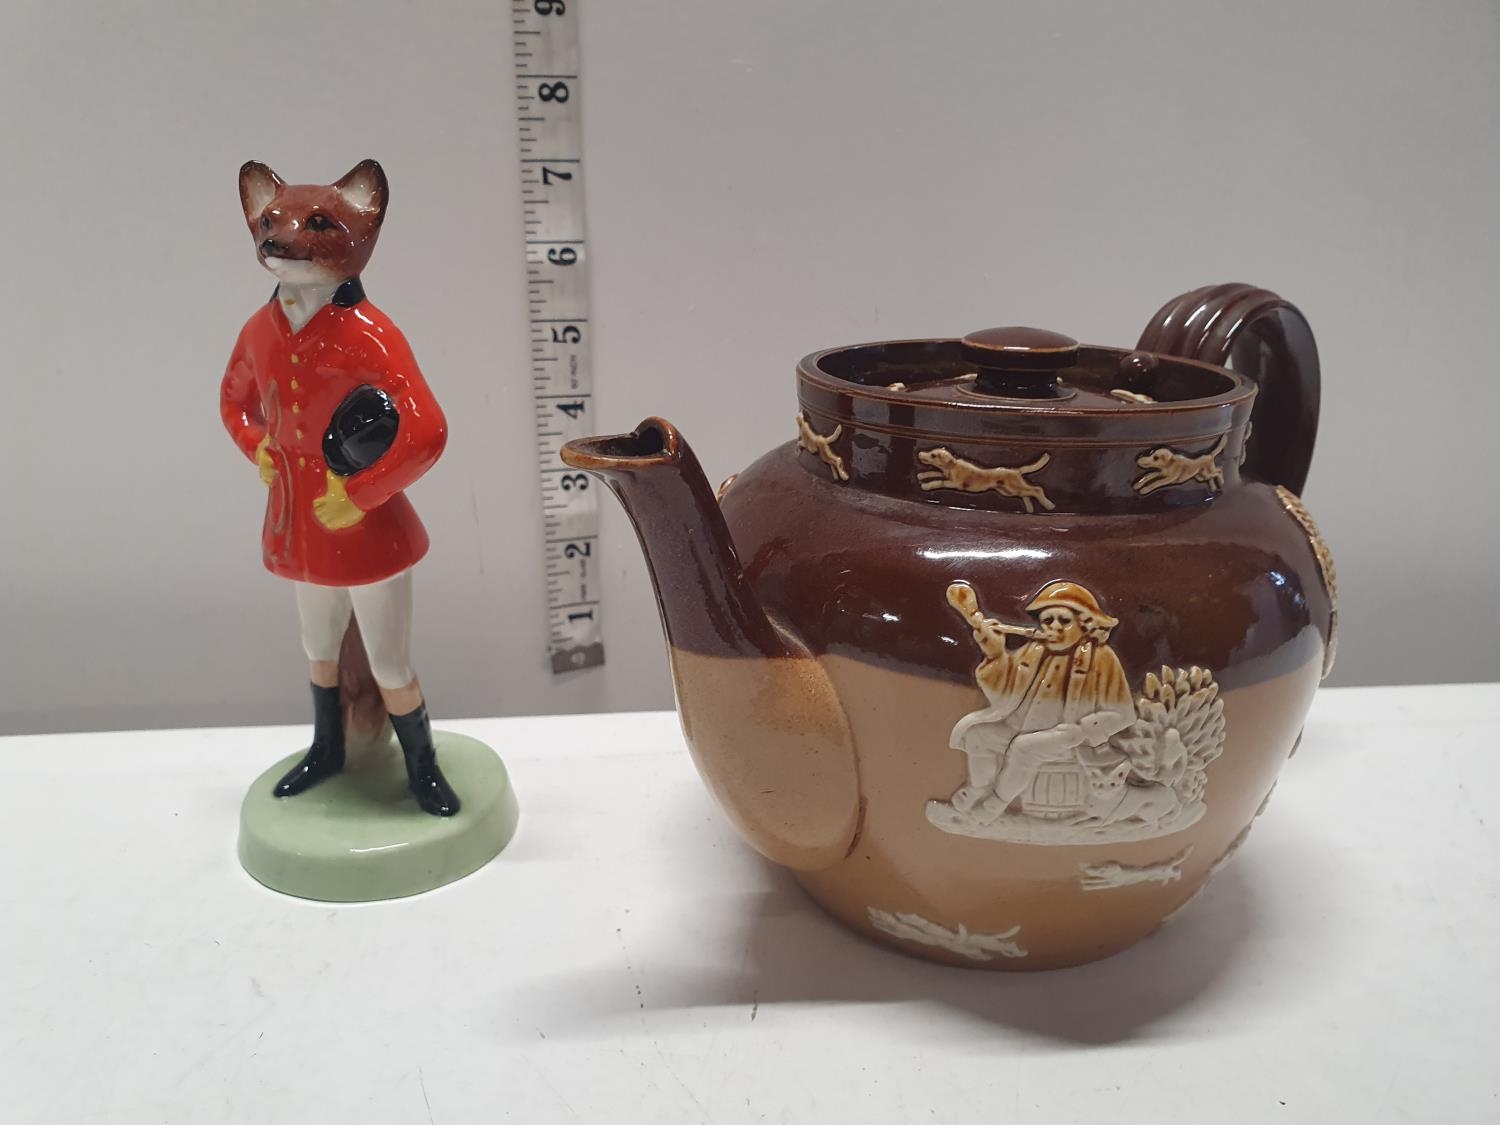 A Royal Doulton teapot and one other ceramic figure, shipping unavailable